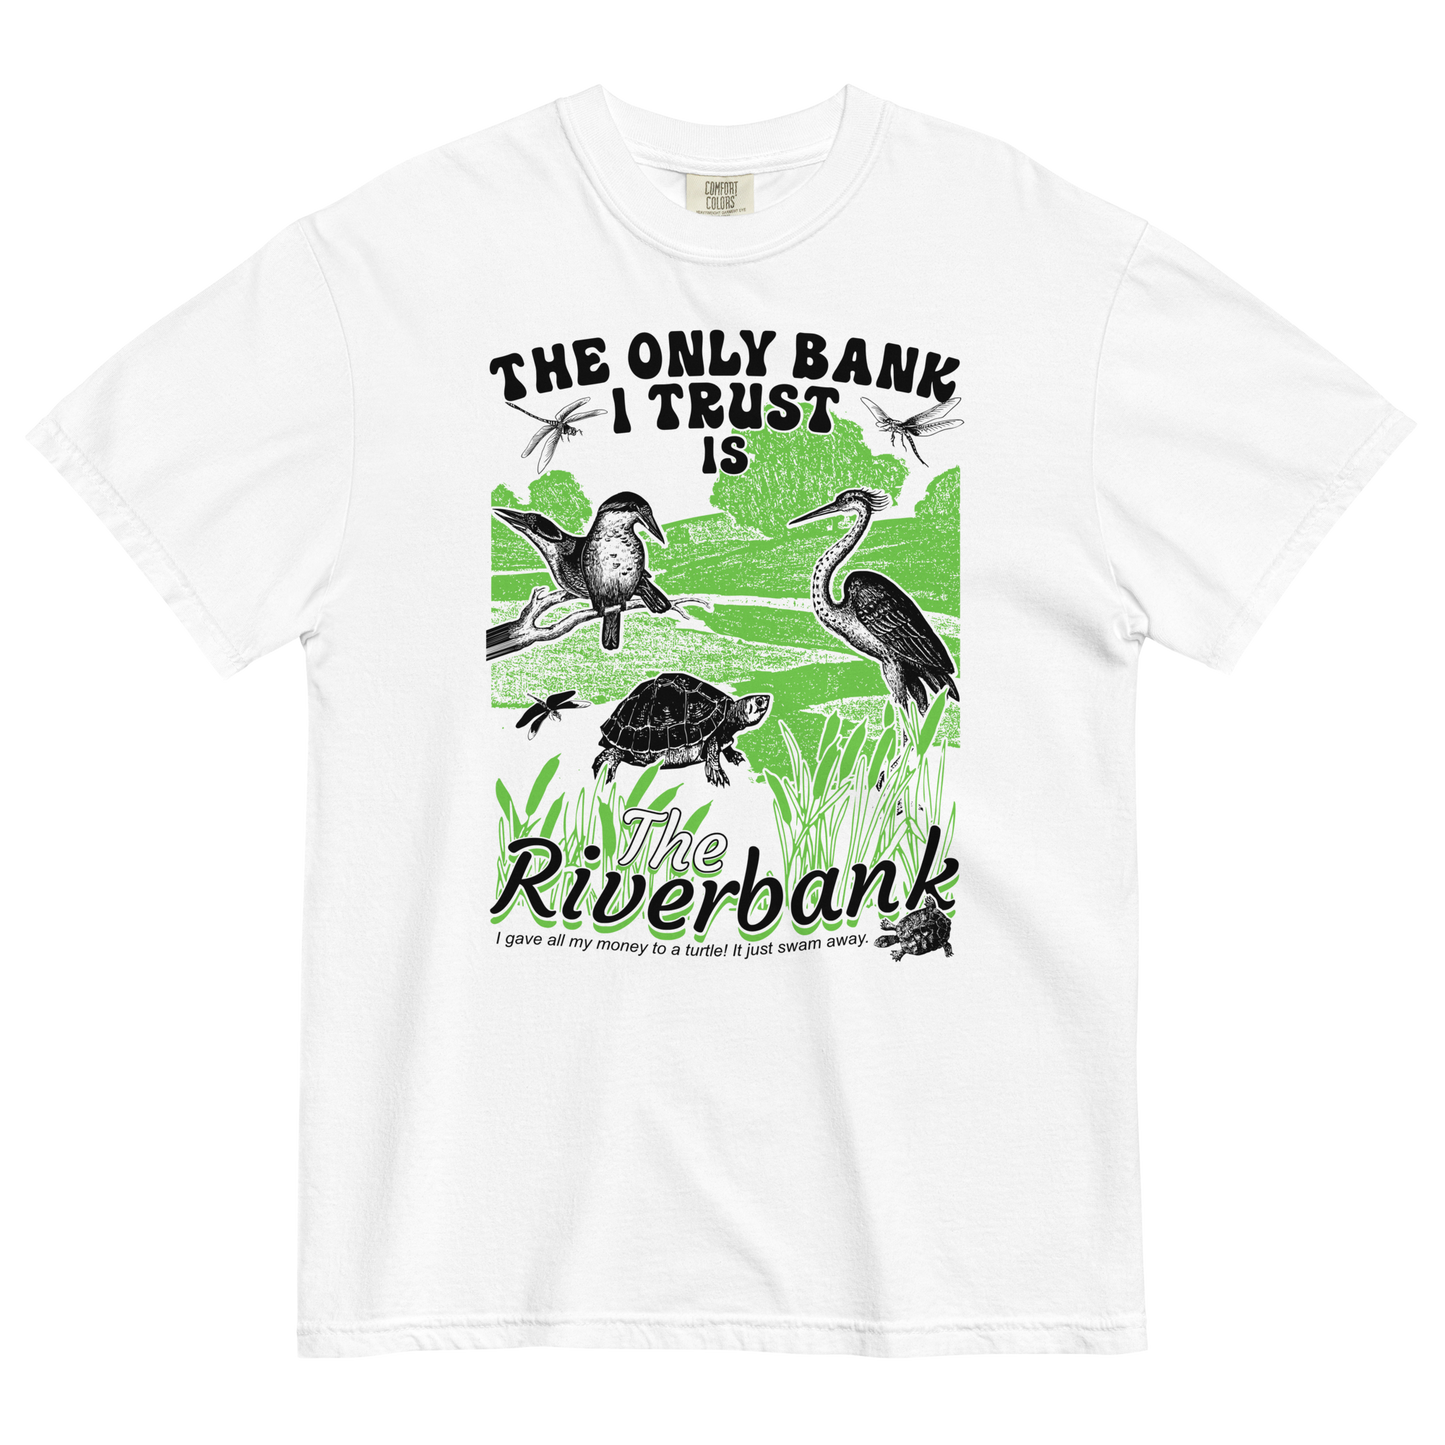 The Only Bank I Trust Is The Riverbank by @ArcaneBullshit.